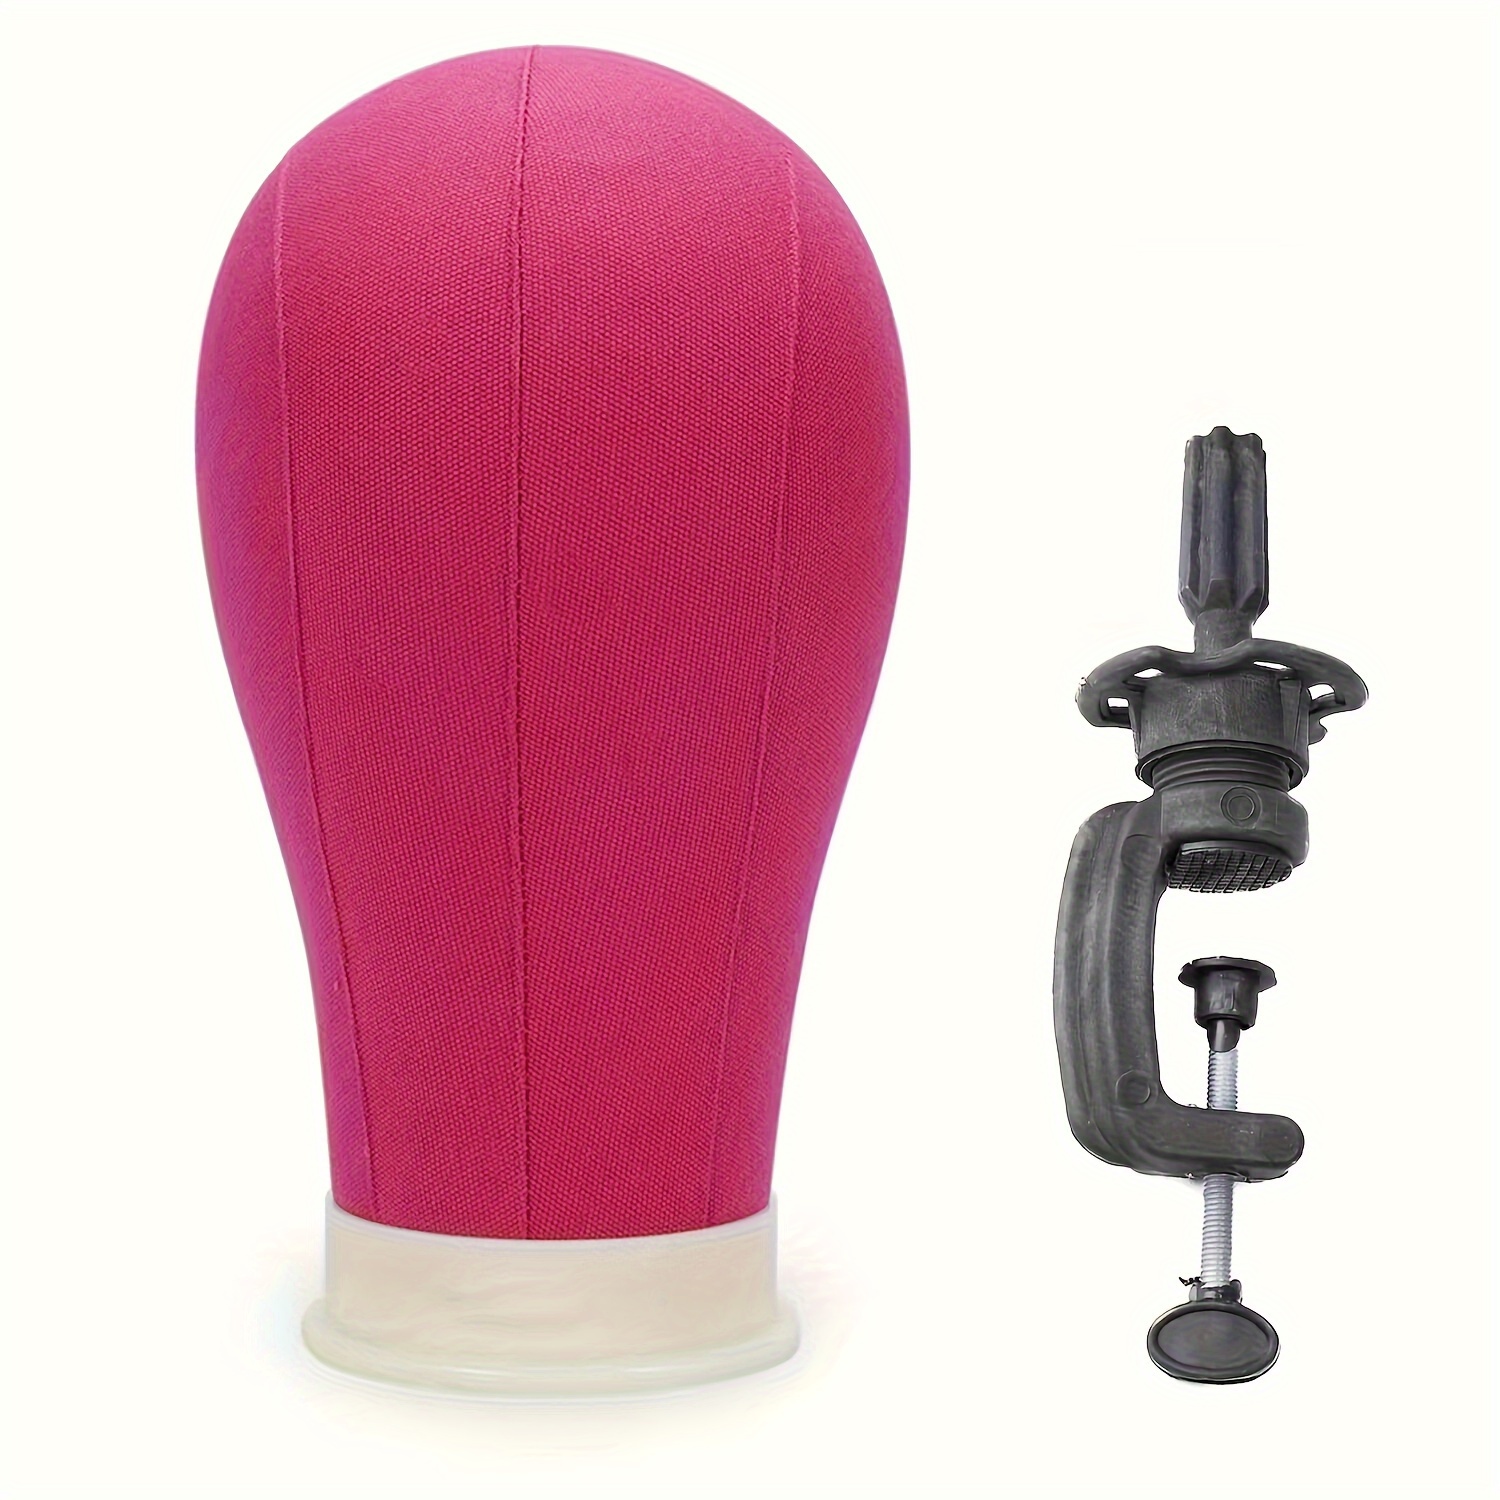 Wig Stand Tripod with Head,23 Inch Red Wig Head Stand with Mannequin Head,Canvas